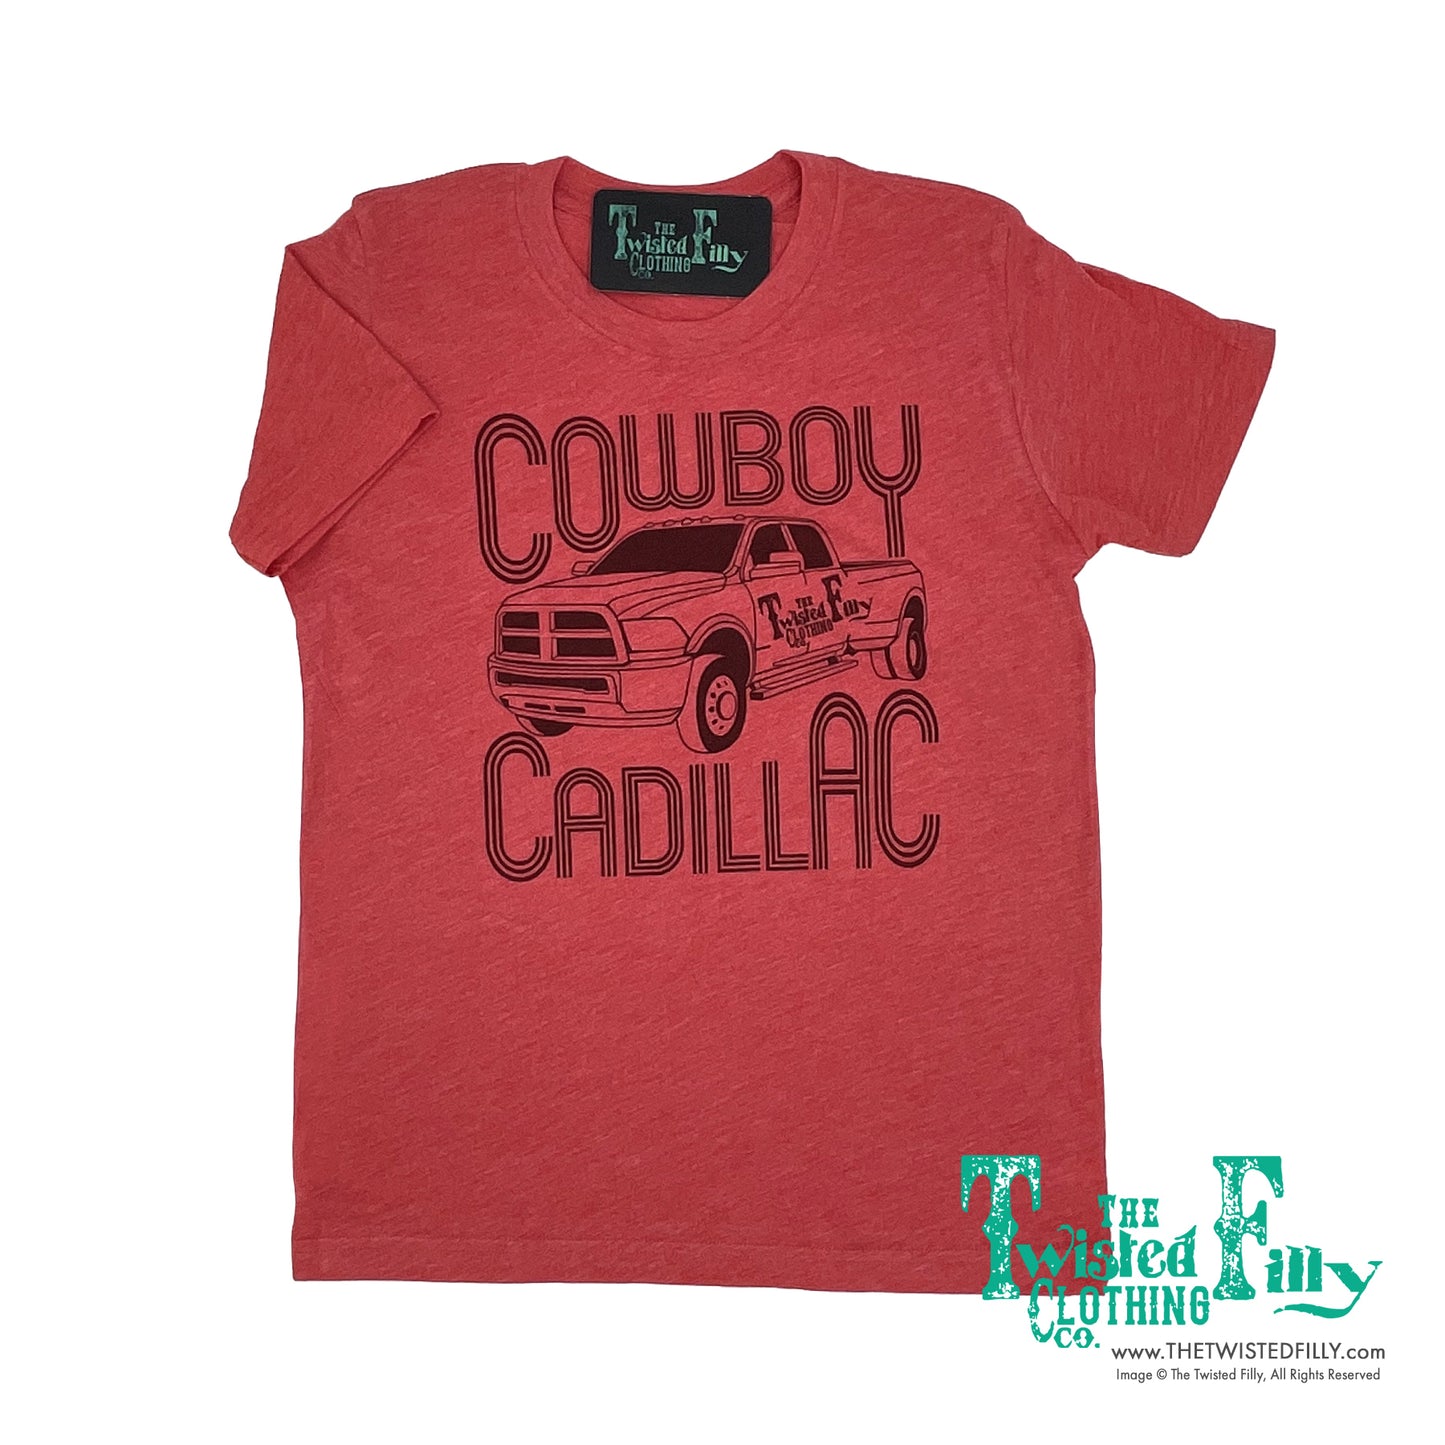 Cowboy Cadillac - S/S Youth Tee - Red